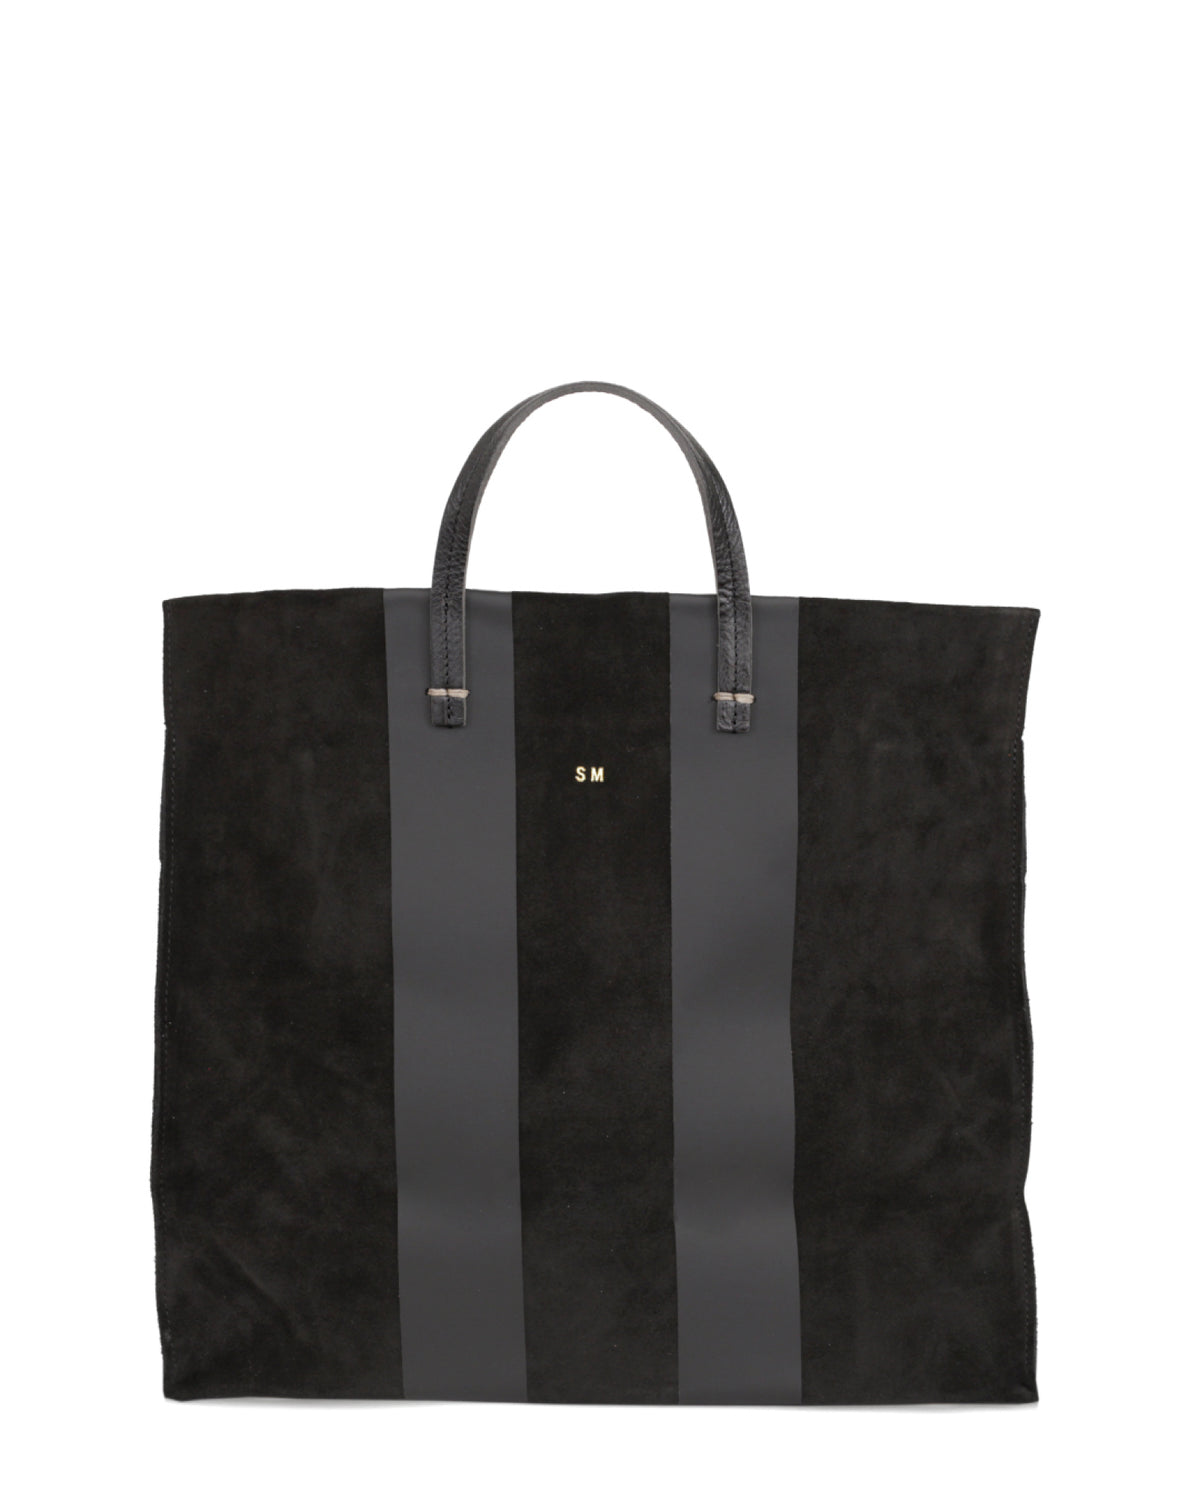 Black with Racing Stripes Simple Tote with Short Gold Foil Monogram In The Top Center.